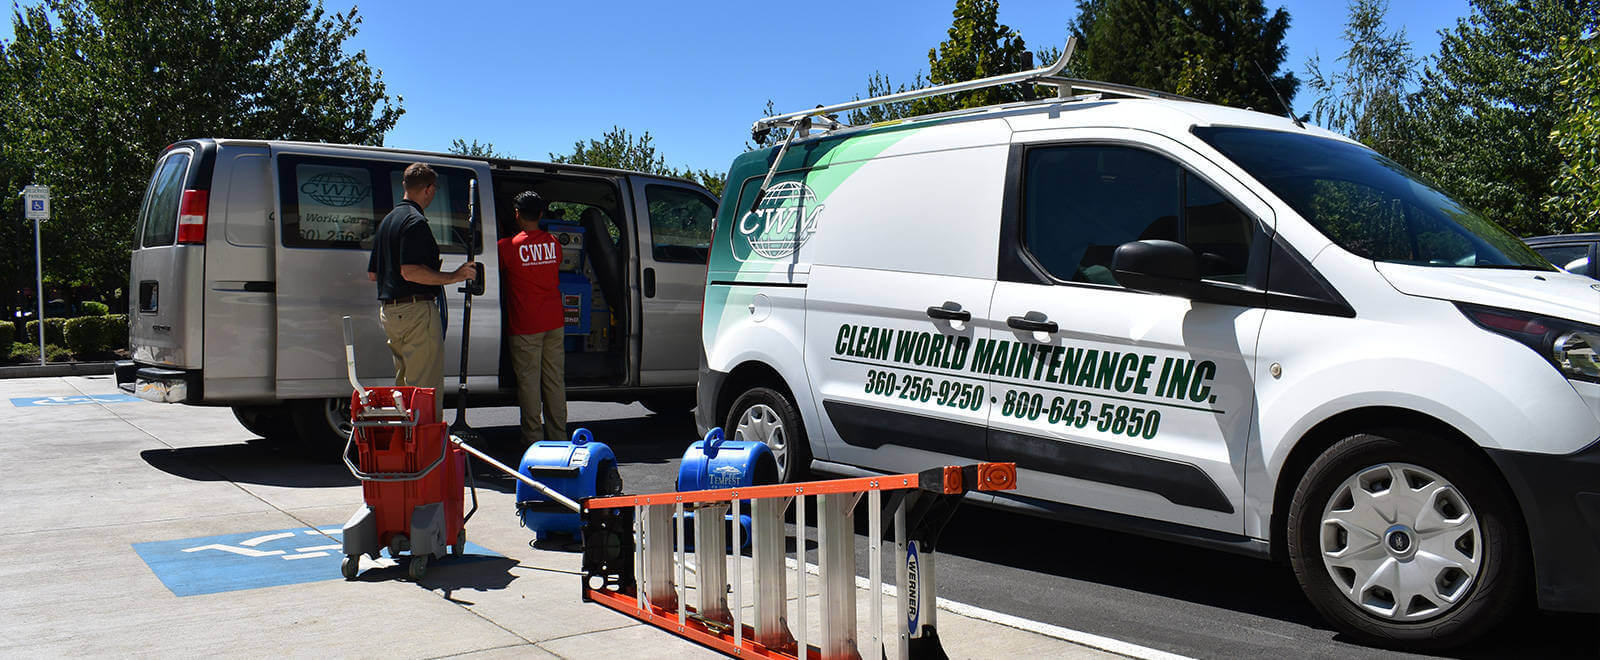 Improve your environment now, call Clean World Maintenance!